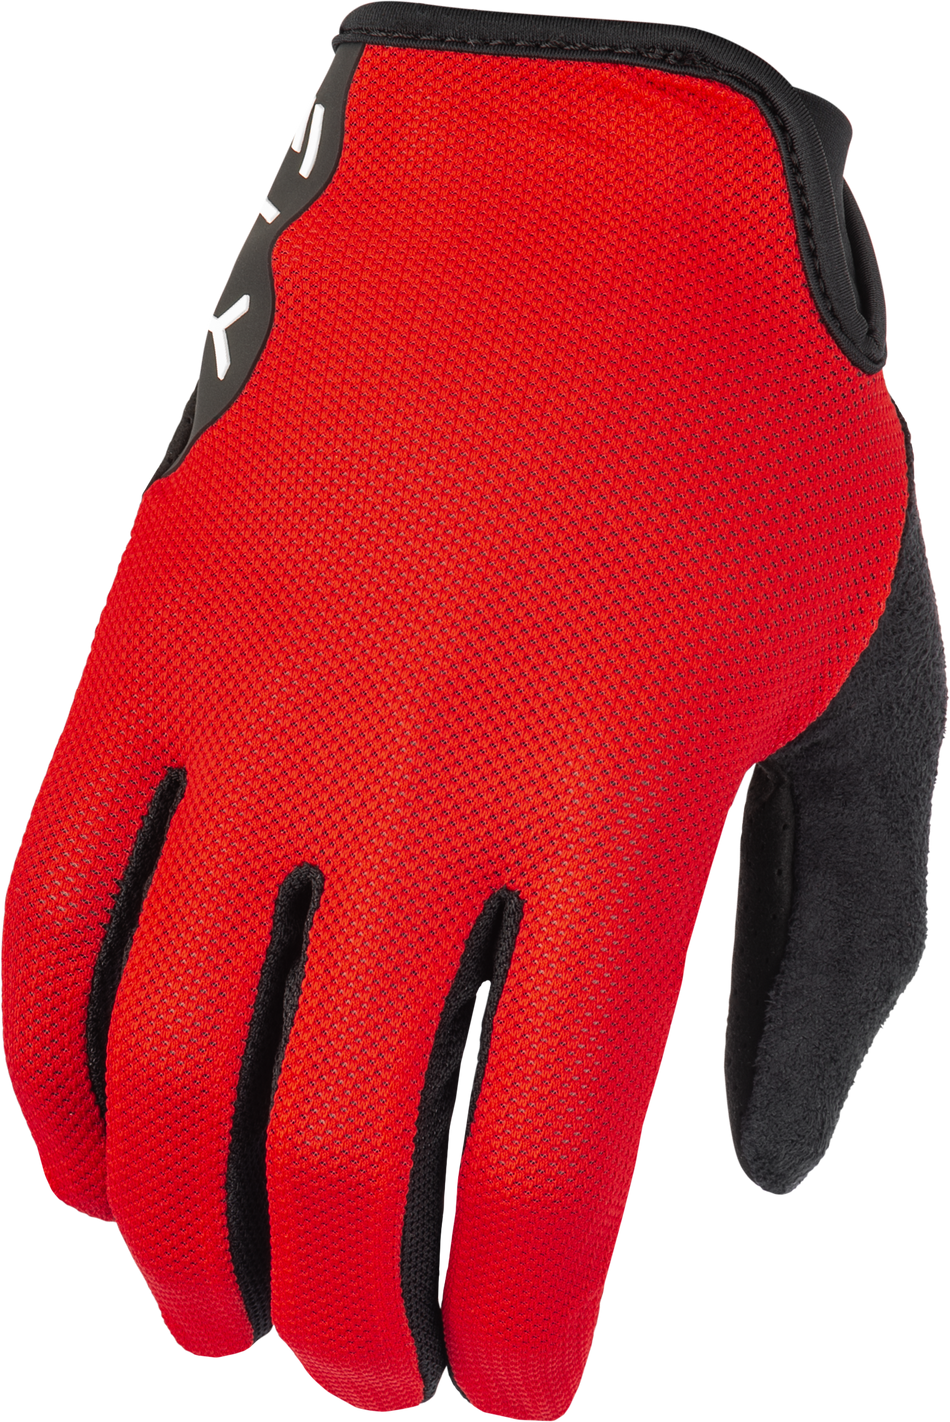 FLY RACING Mesh Gloves Red Xl 375-337X